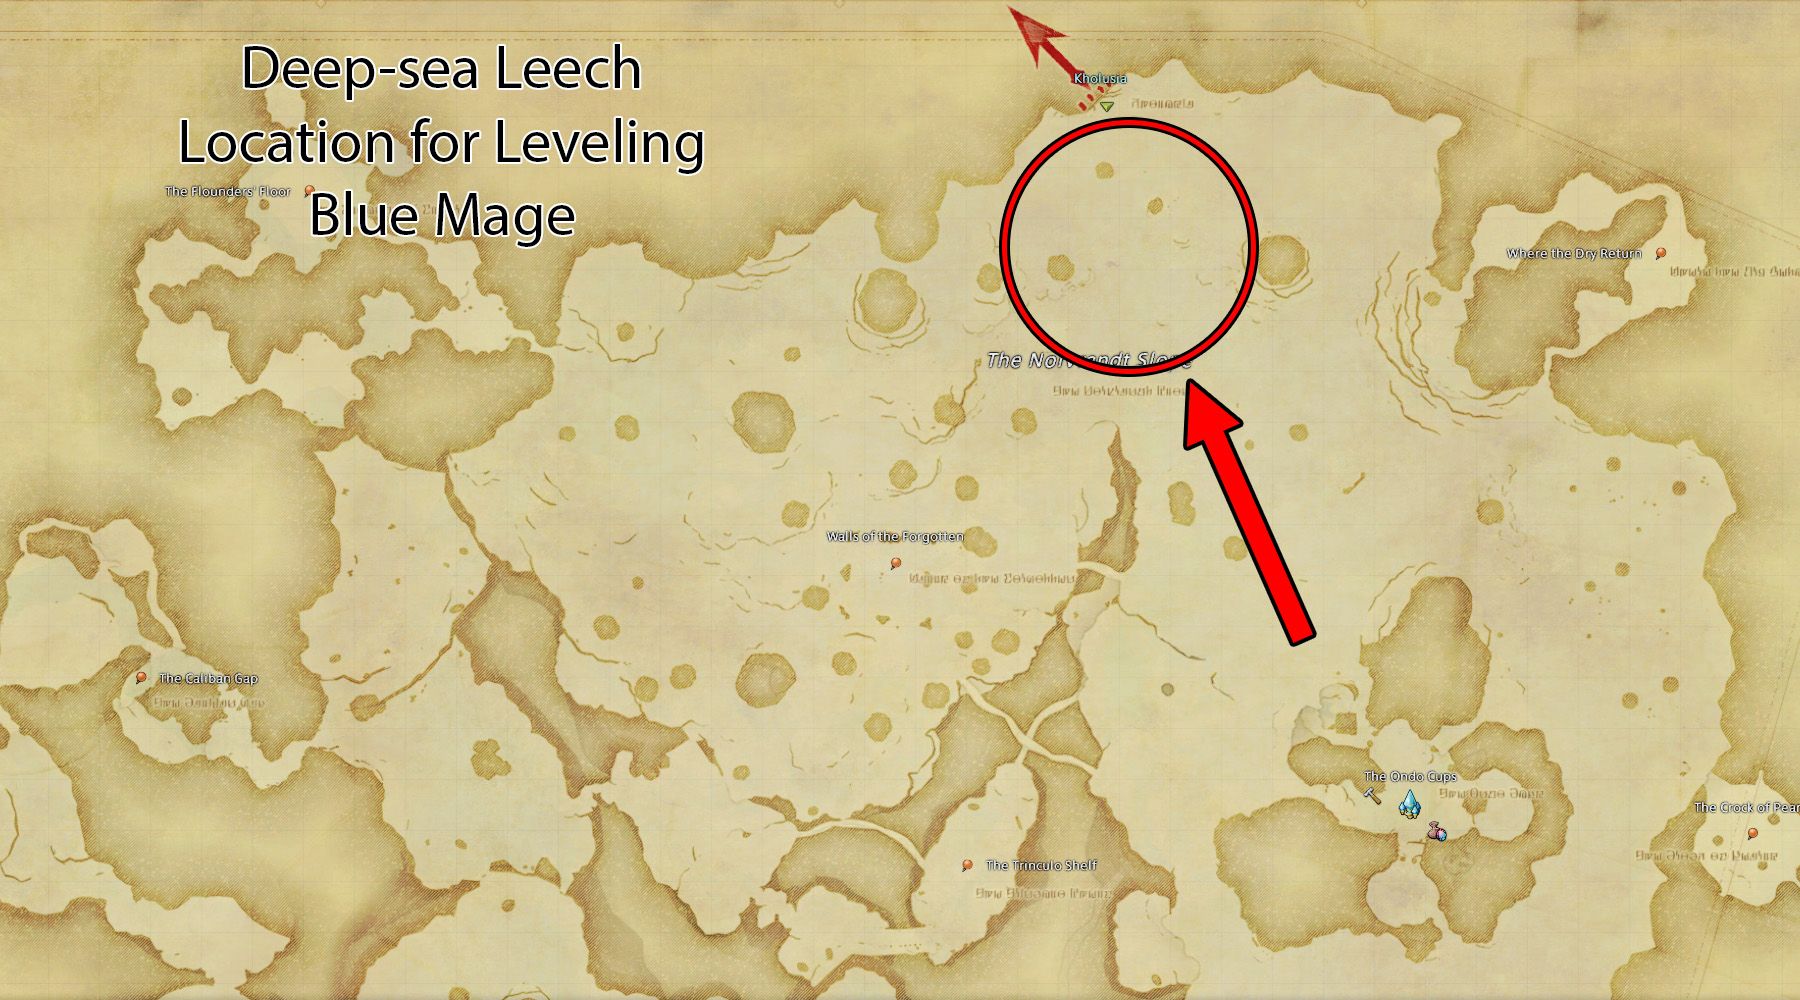 A map of The Tempest in Final Fantasy 14, with the location of Deep-sea Leeches circled in red.